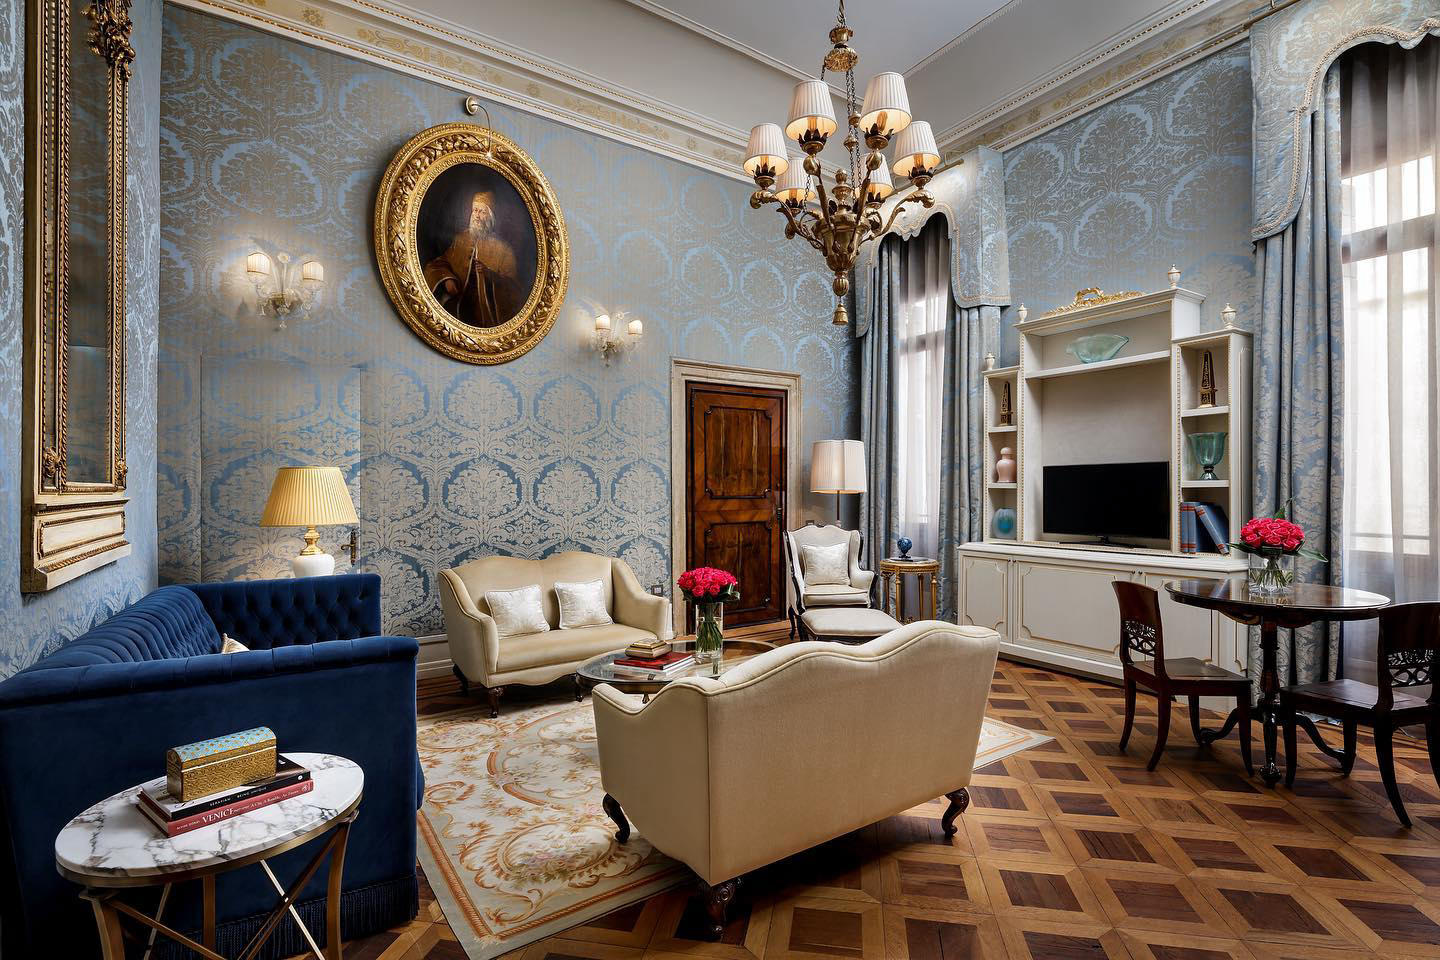 Looking for a suite which creates a calming atmosphere after a day of exploring Venice